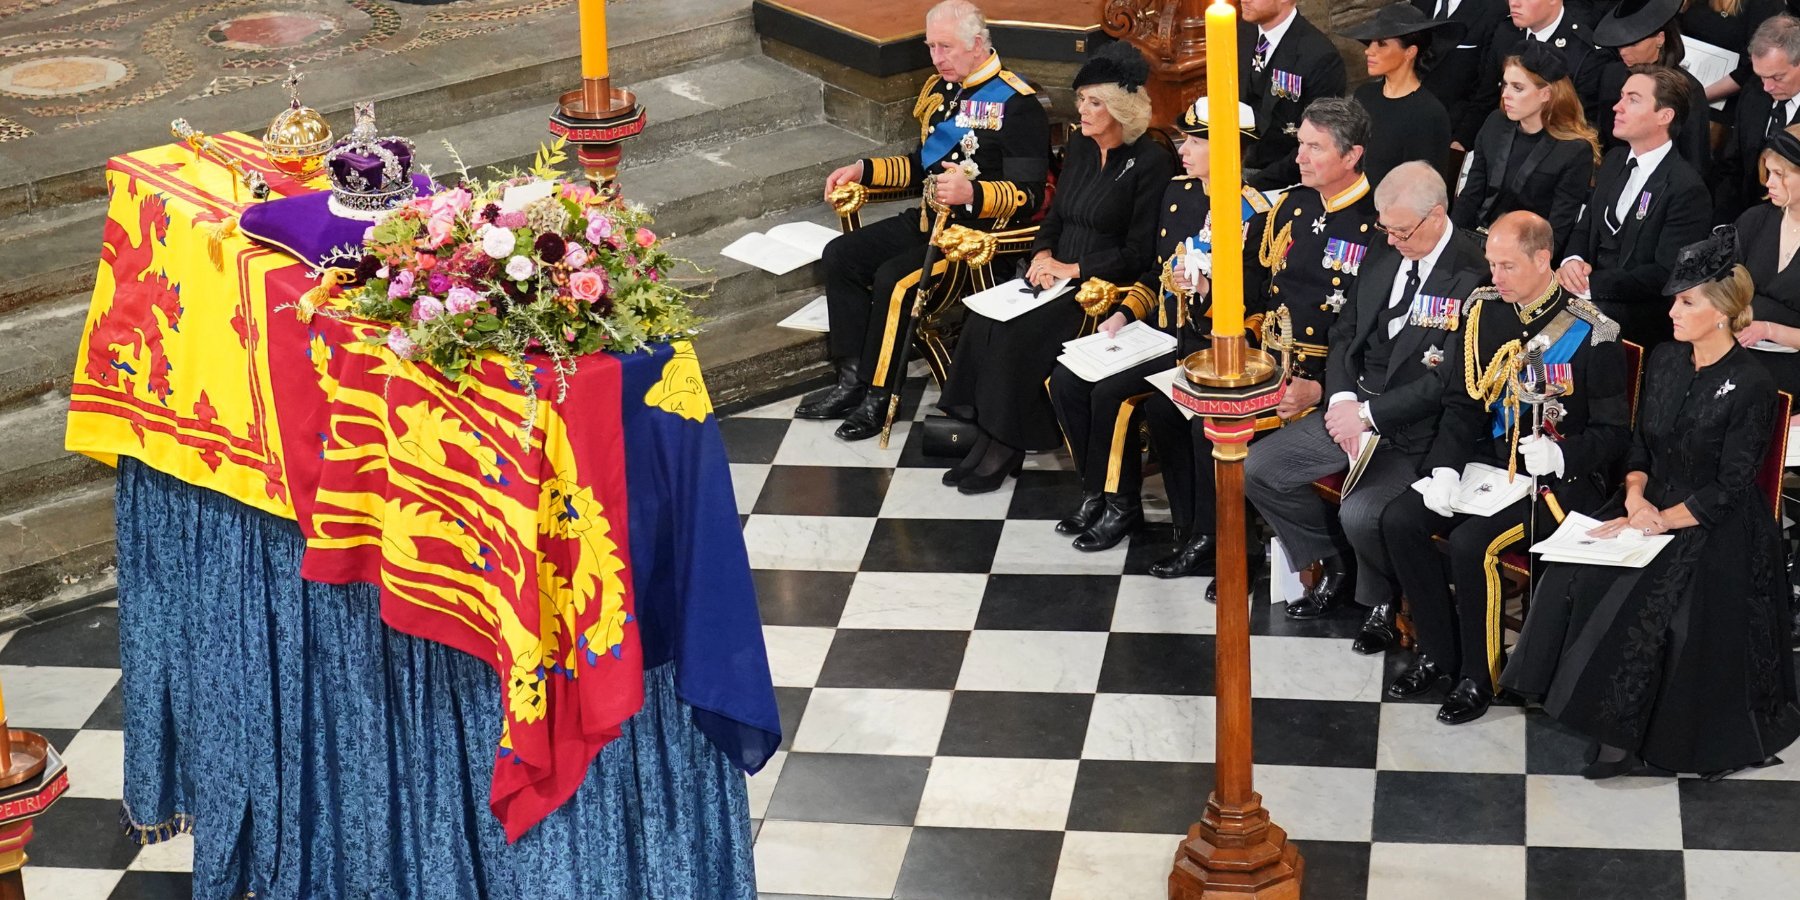 Queen Elizabeth's coffin watched over by the royal family at Westminster Abbey on Sept. 19, 2022.